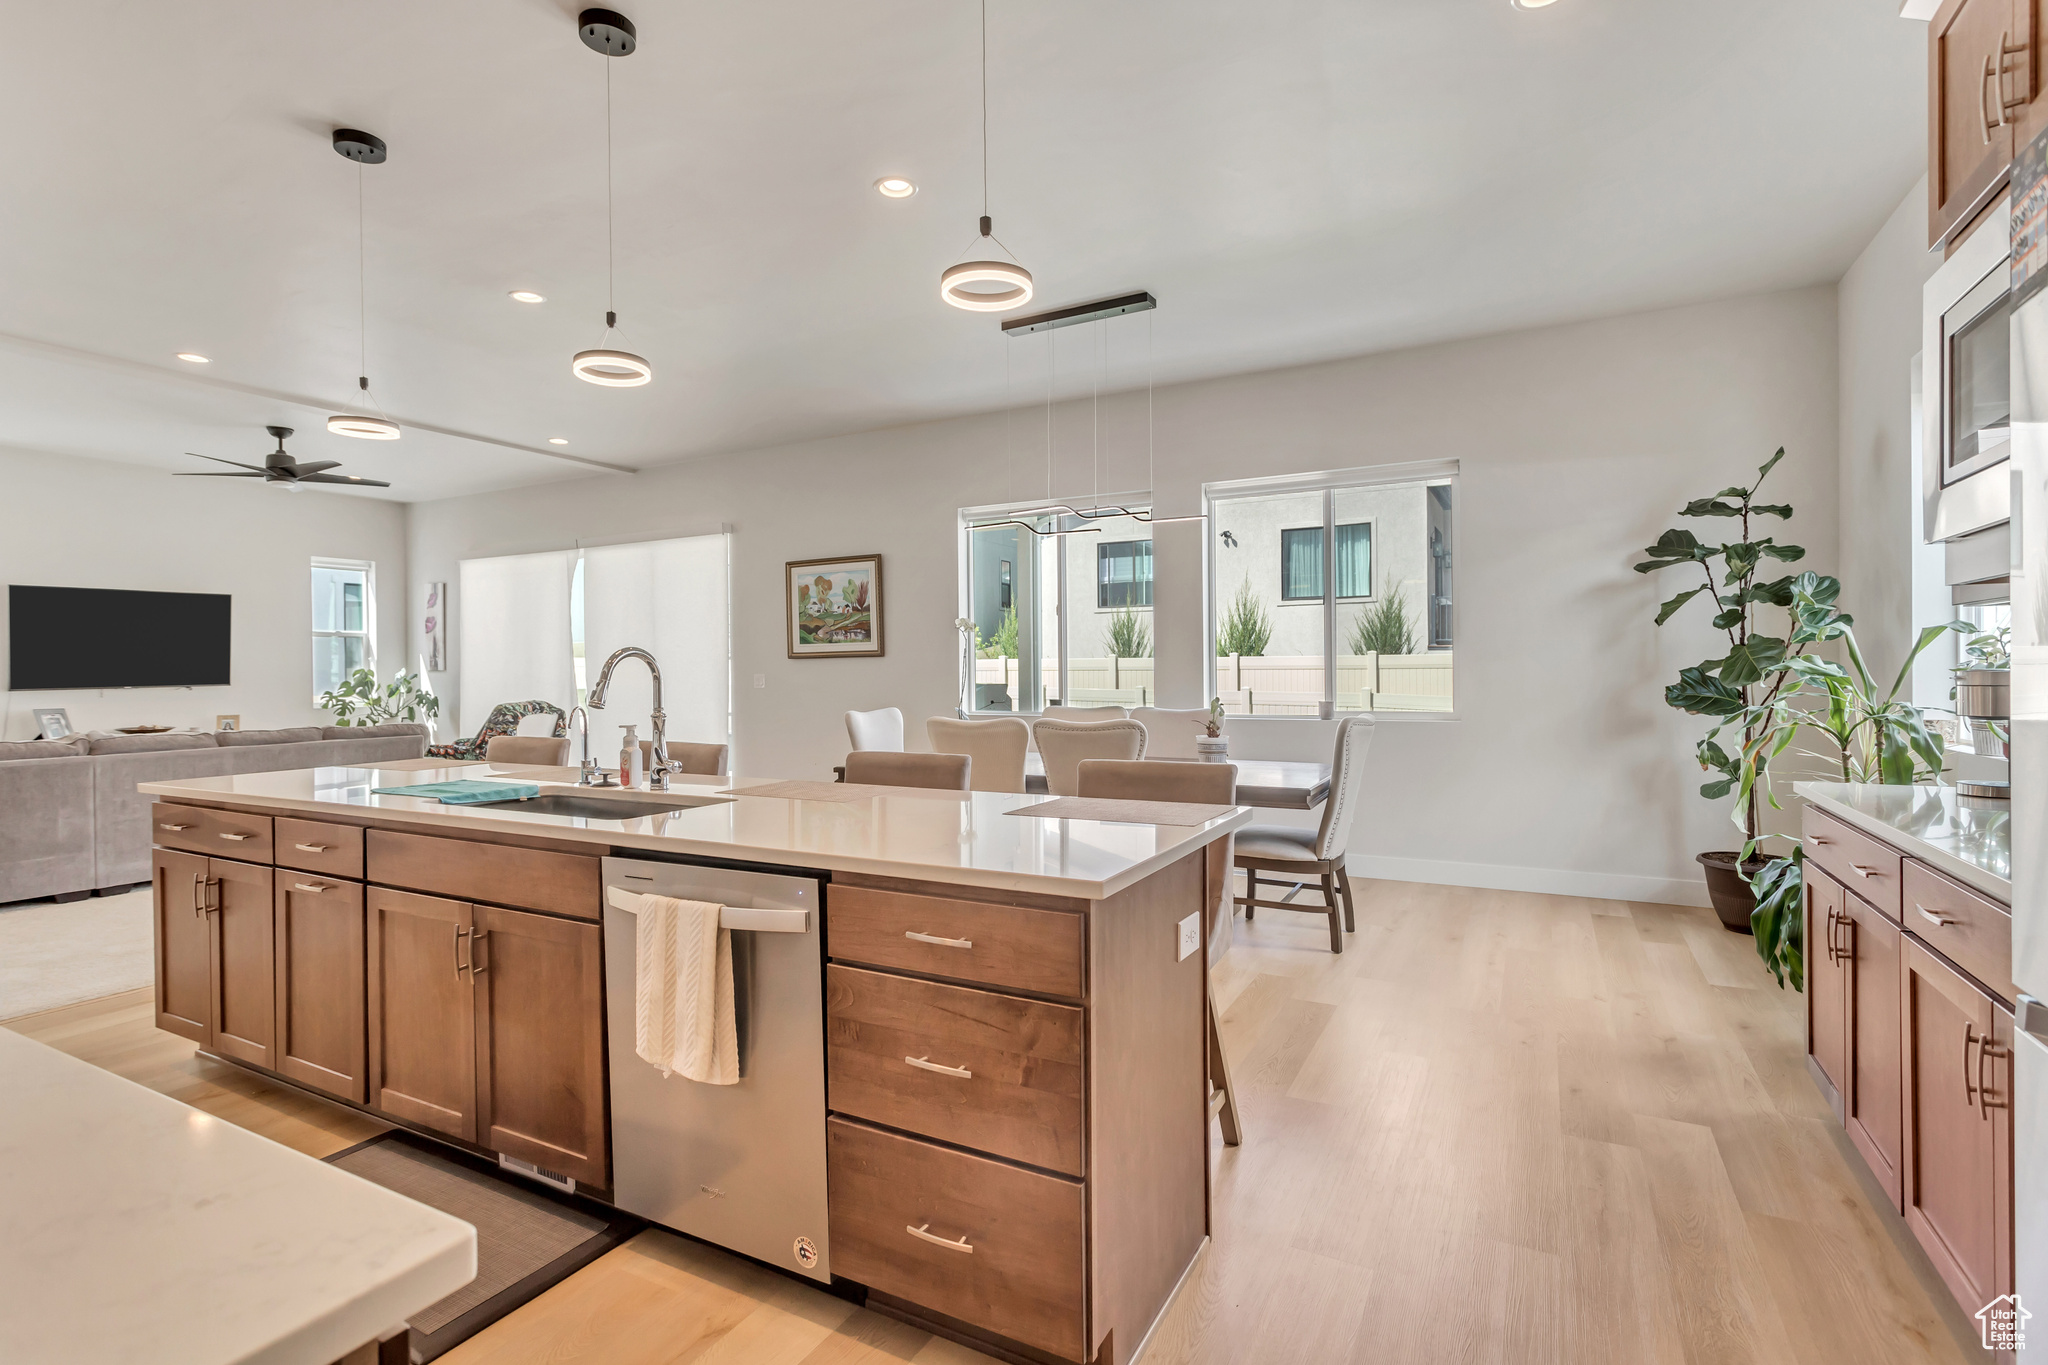 Kitchen featuring light hardwood / wood-style flooring, pendant lighting, dishwasher, and a center island with sink